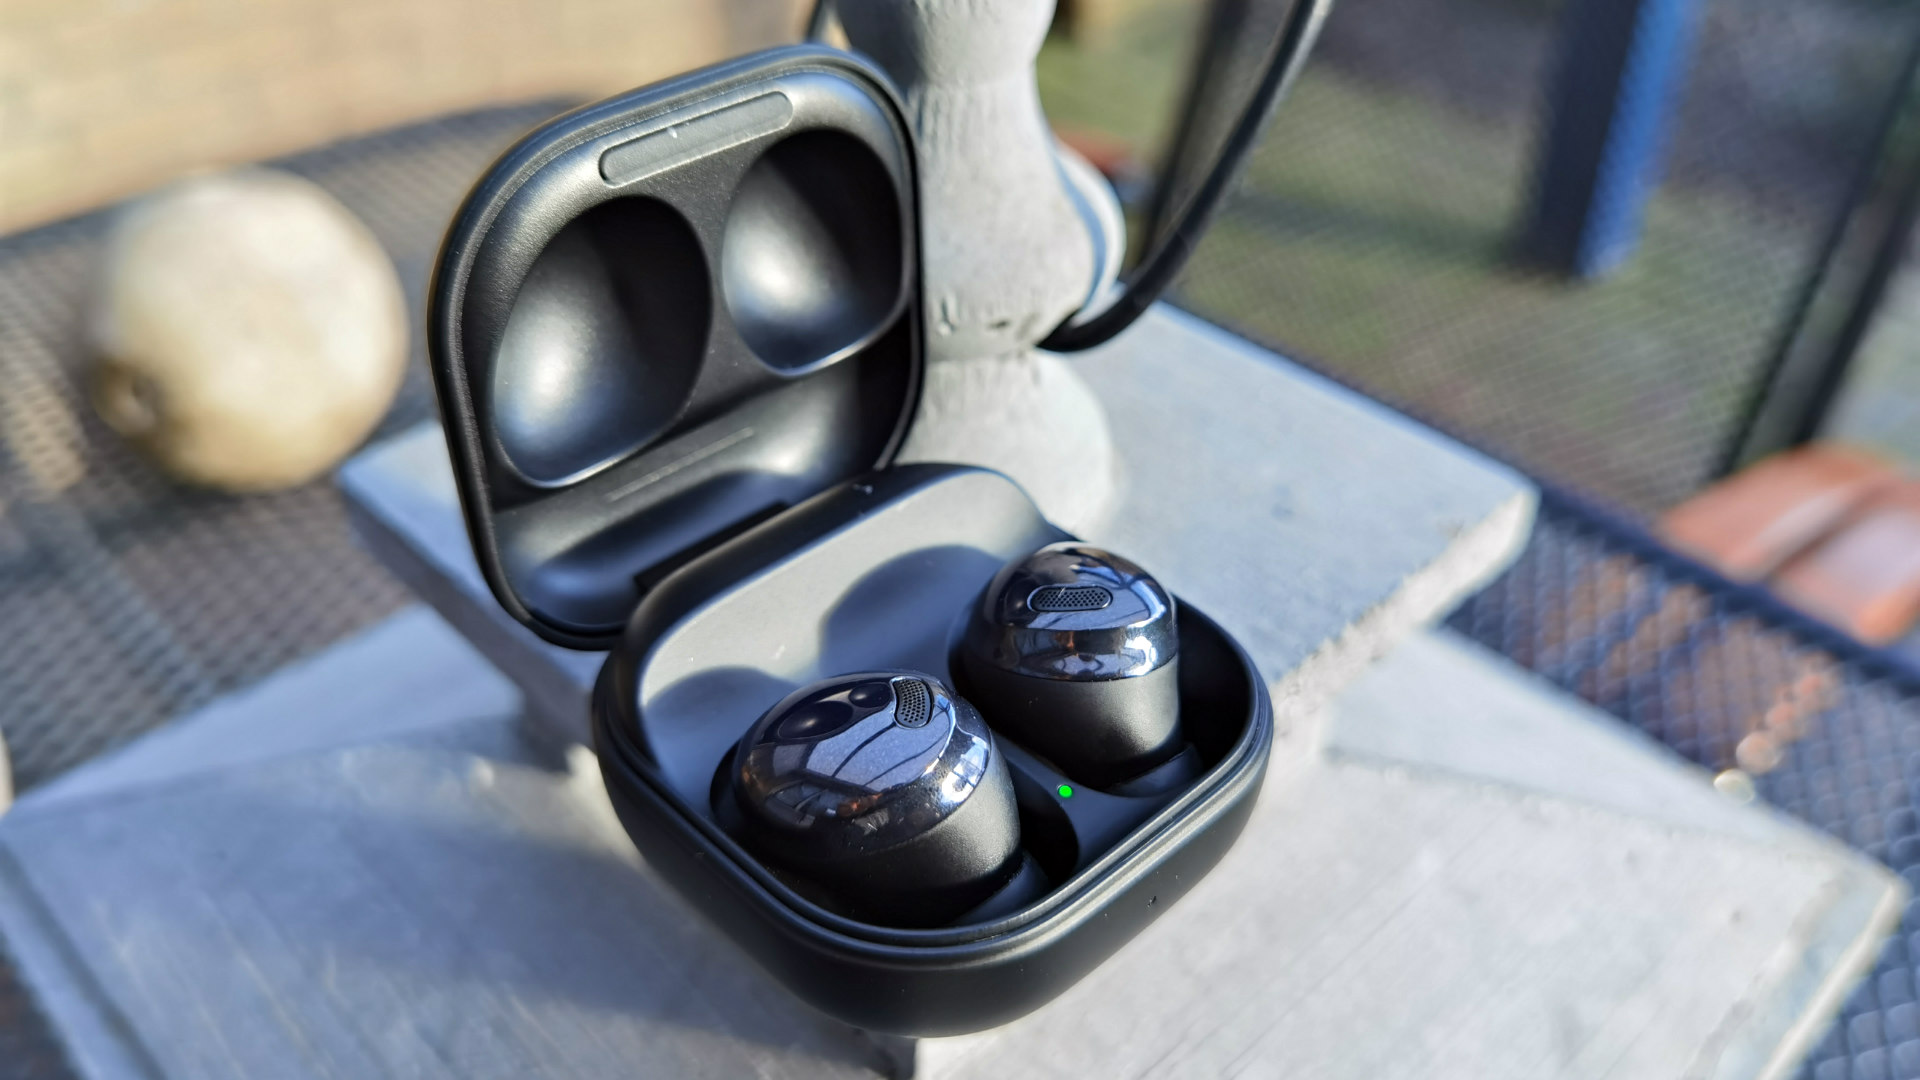 Best Wireless Earbuds To Pair With Your iPhone